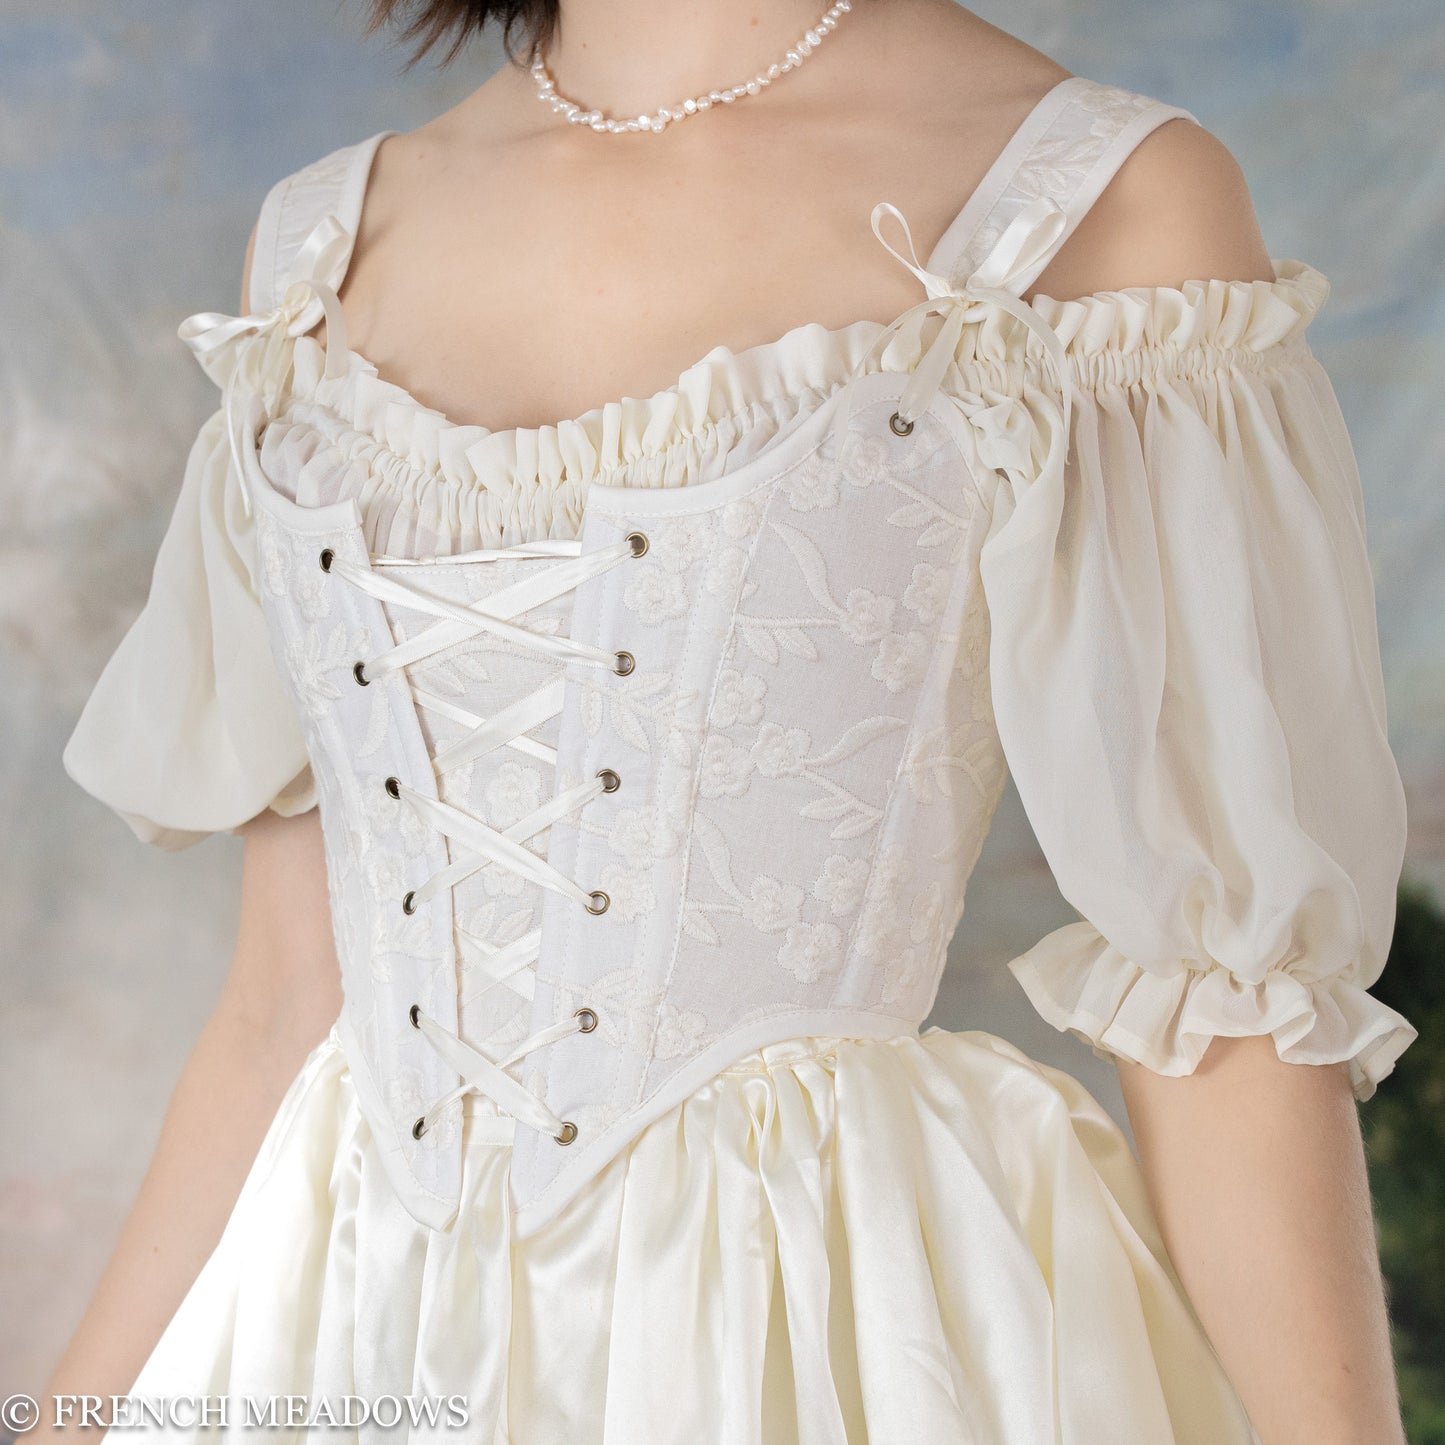 Load image into Gallery viewer, close up view of model wearing a renaissance corset for a medieval wedding dress
